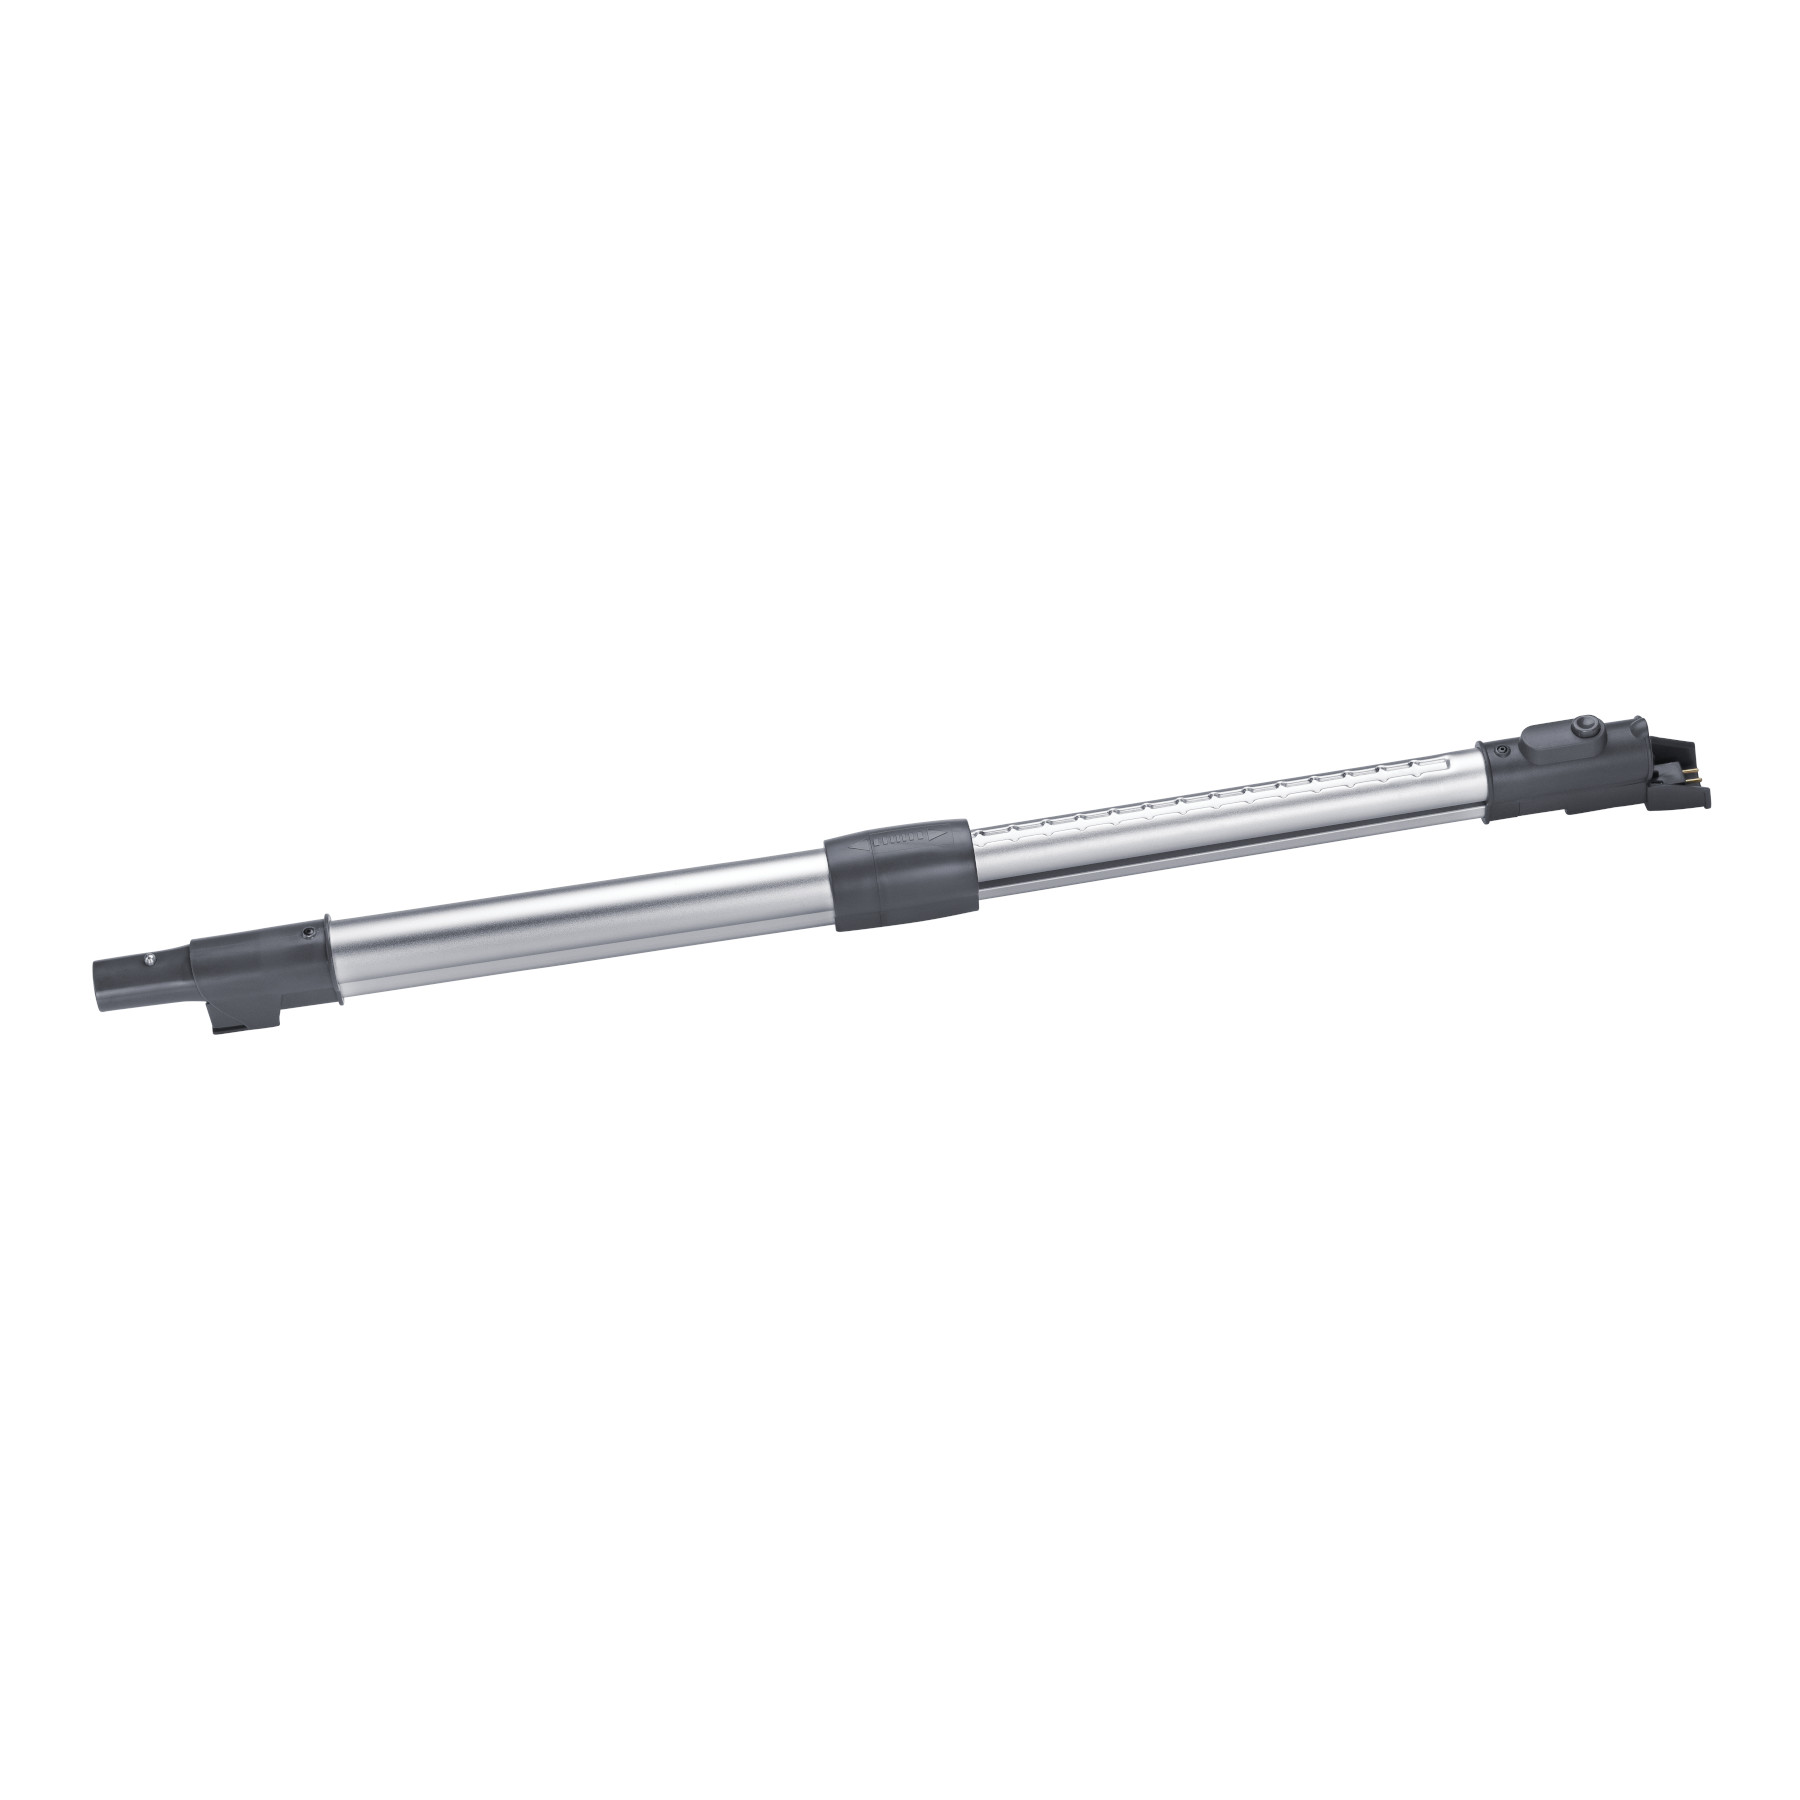 Adjustable-Ratcheting Wand for Central Vacuums, Adjustable Length, with Dark Gray with Metal Finish